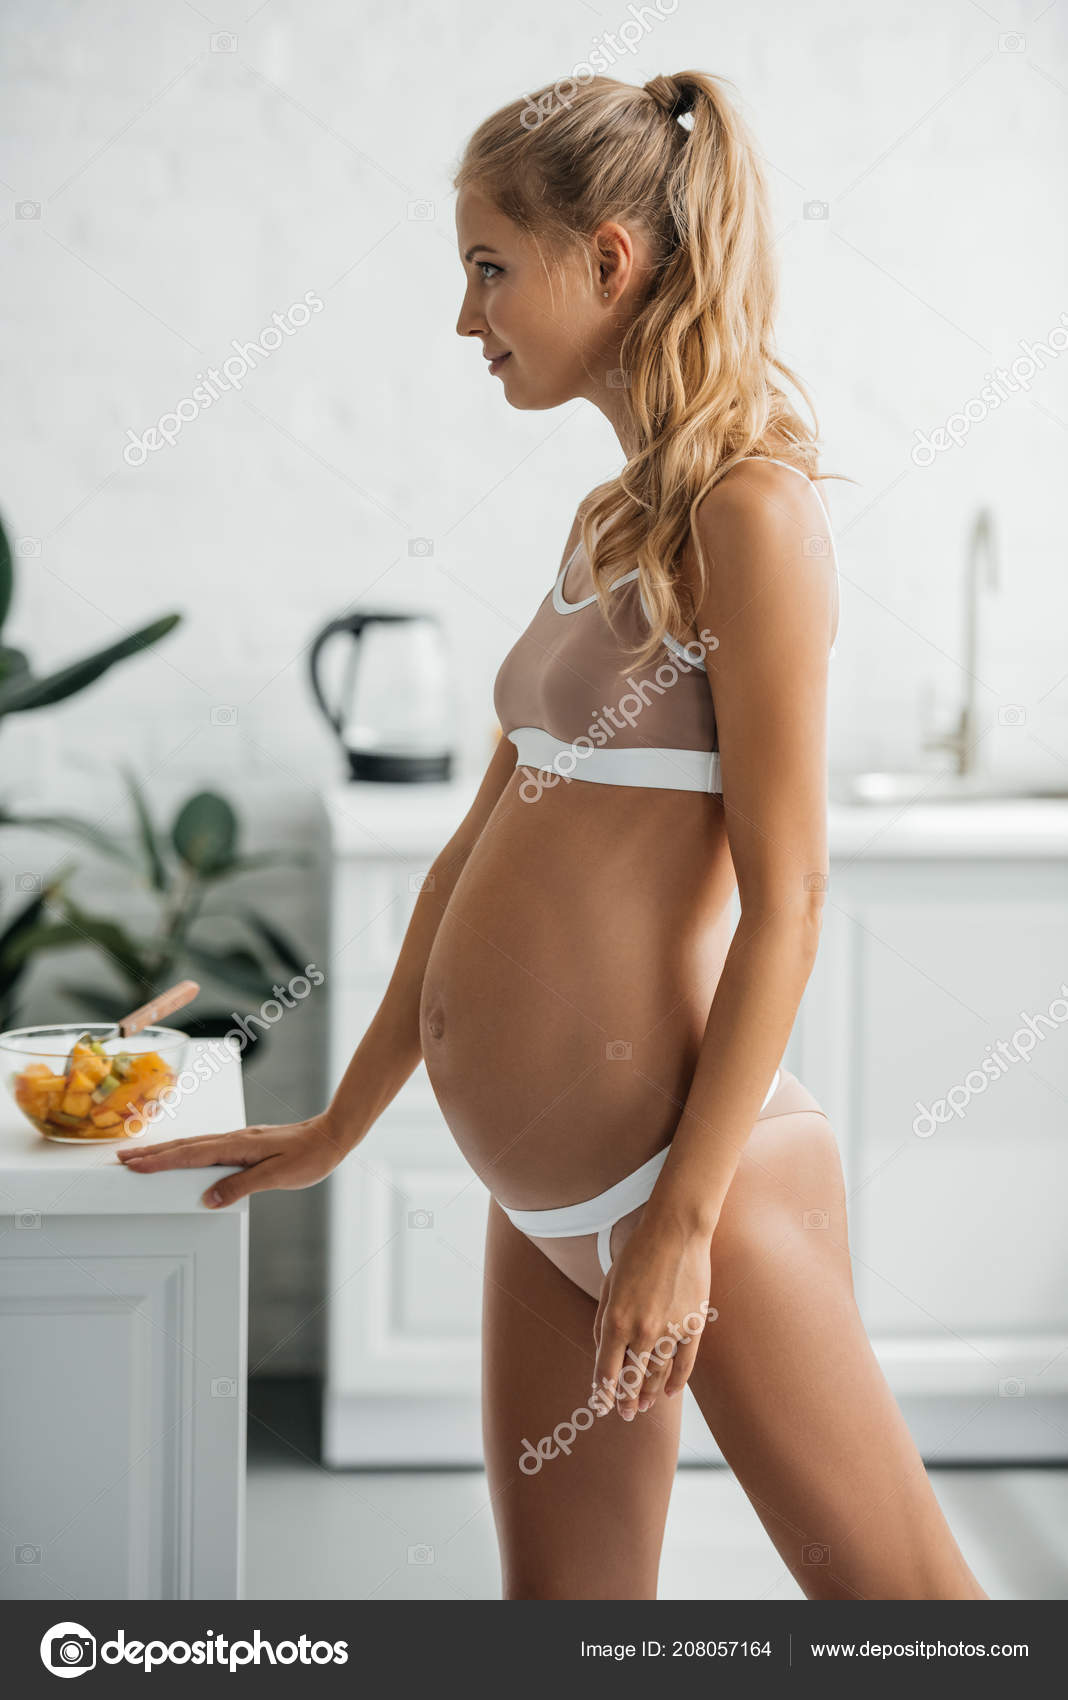 18,131 Pregnant Women Underwear Images, Stock Photos, 3D objects